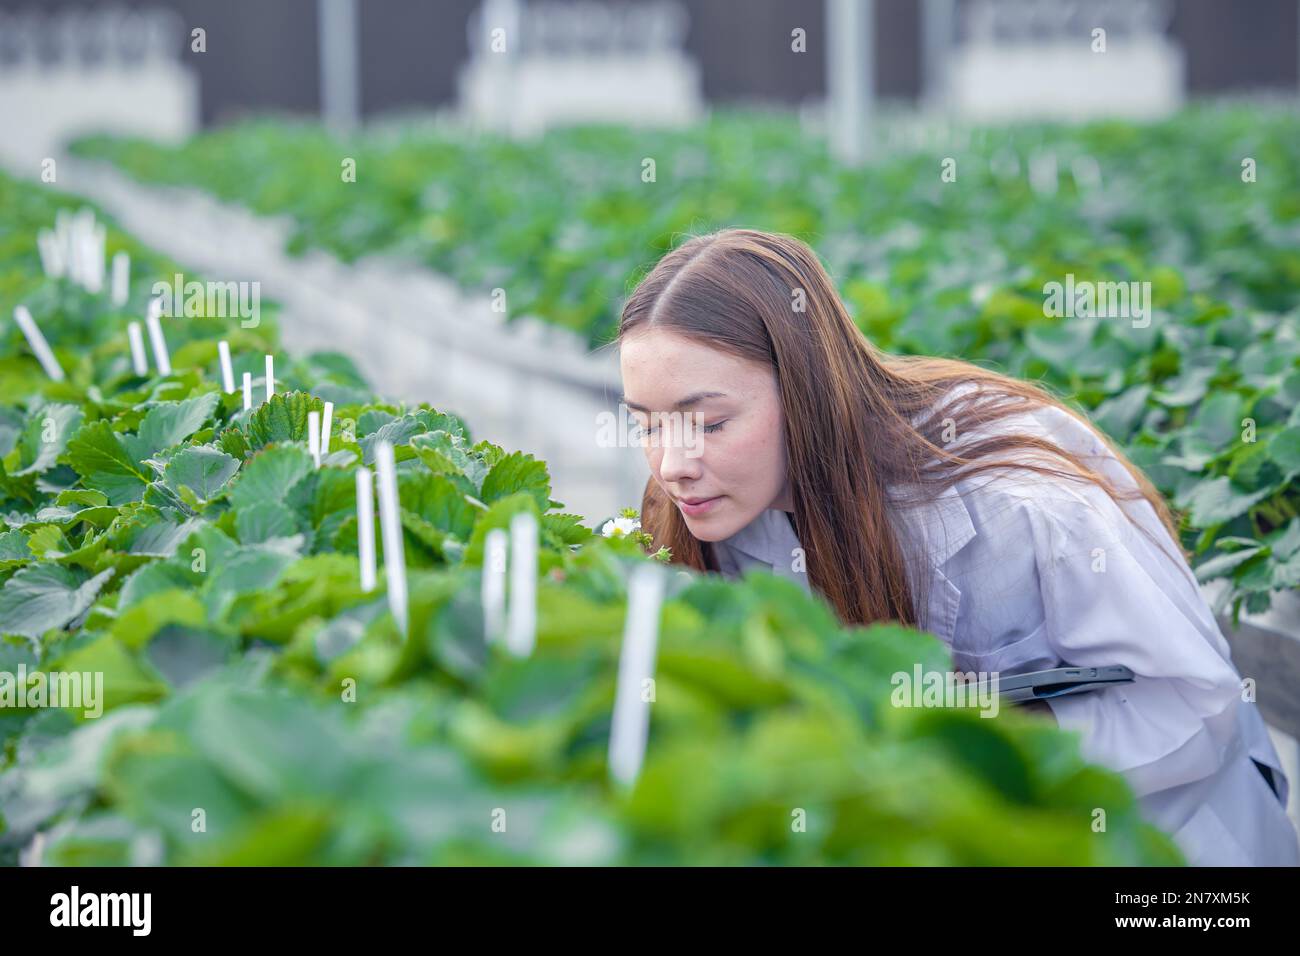 scientist working in indoor organic strawberry agriculture farm nursery plant species for medical research. Stock Photo